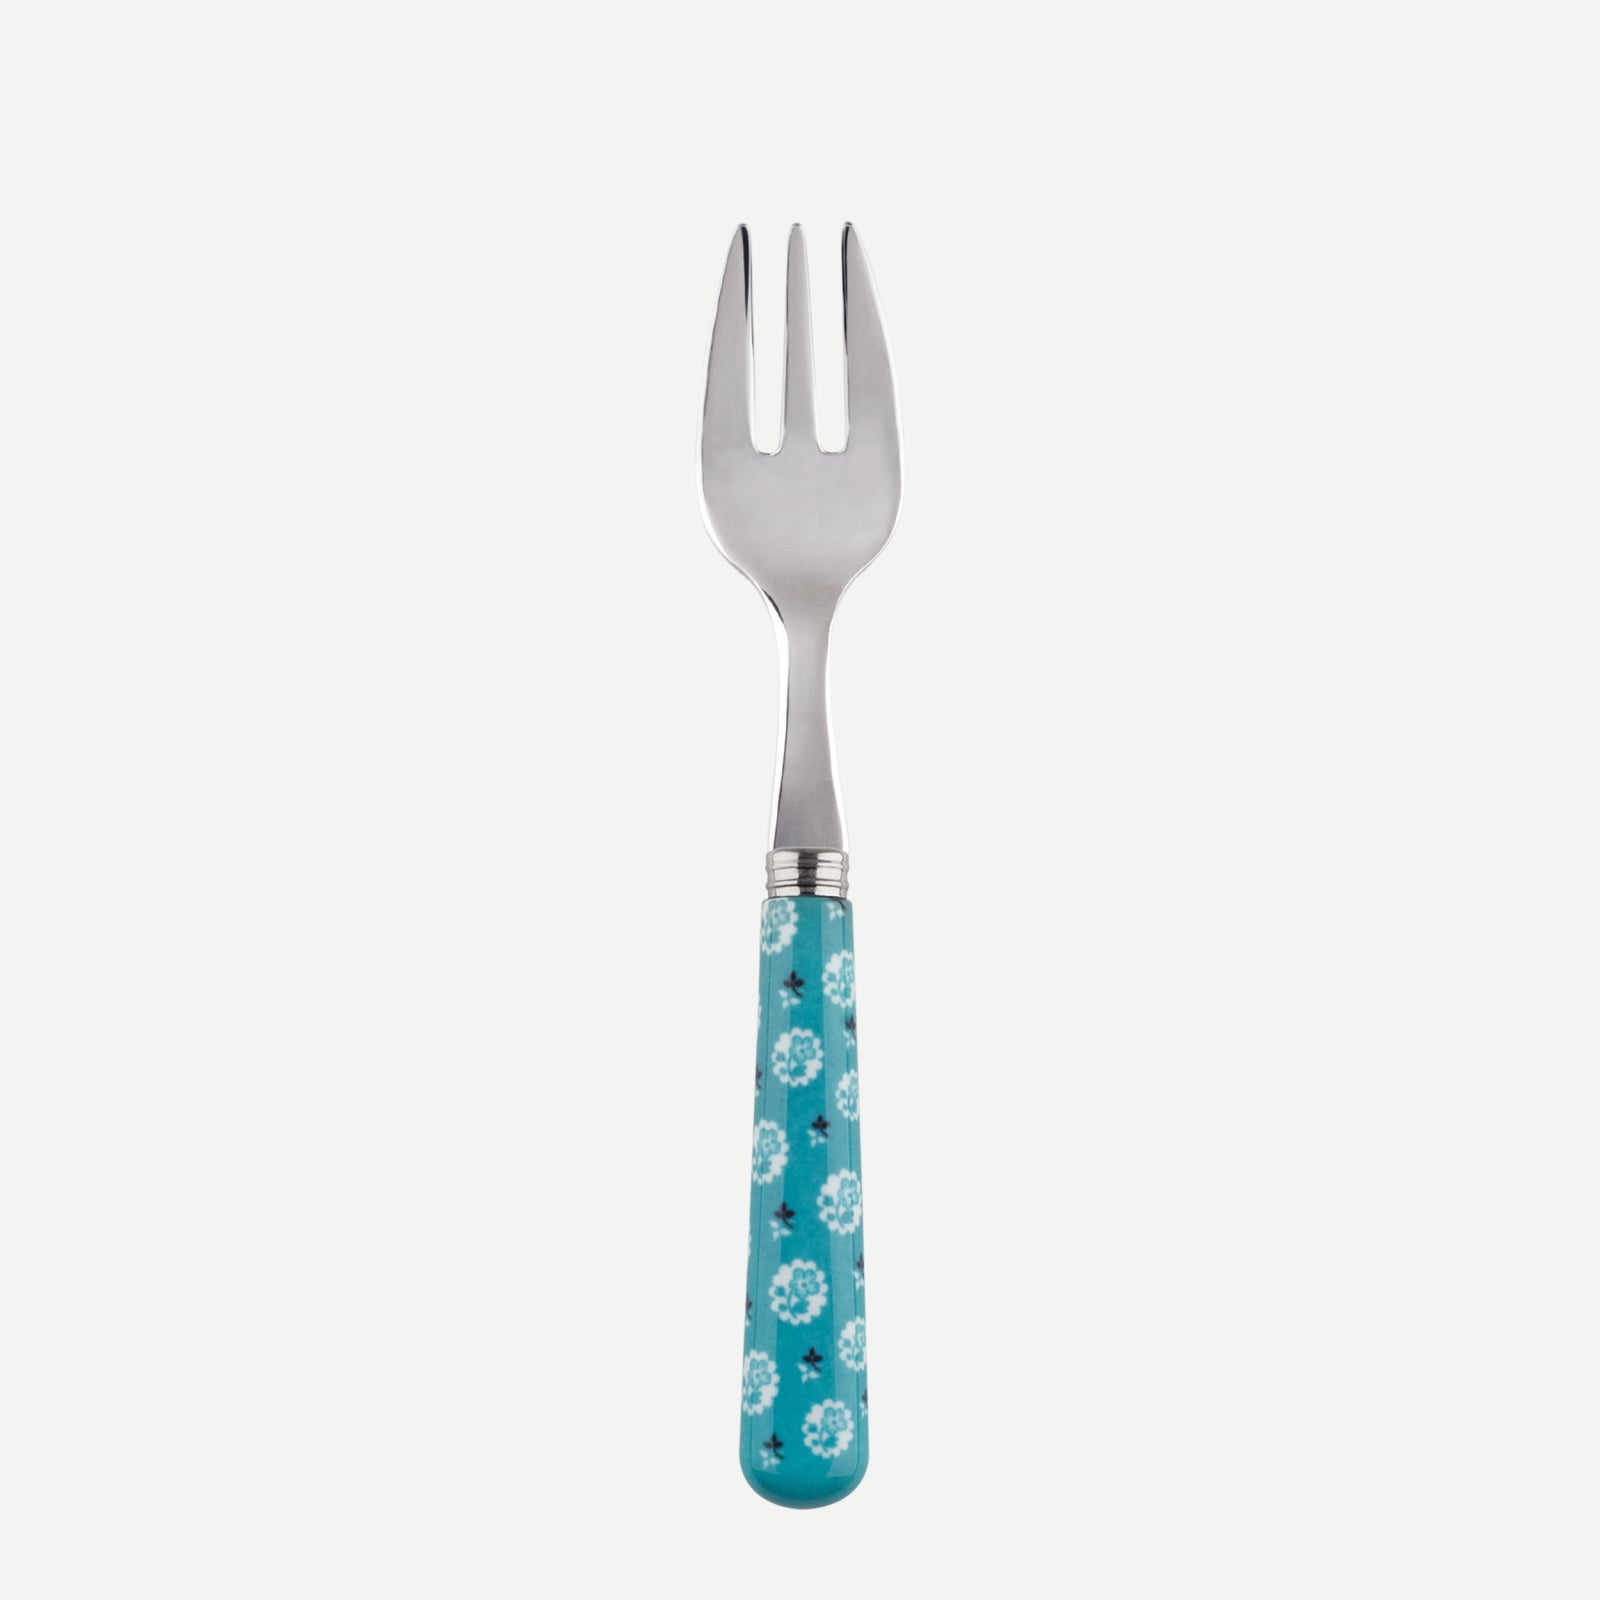 Oyster fork - Provencal - Turquoise